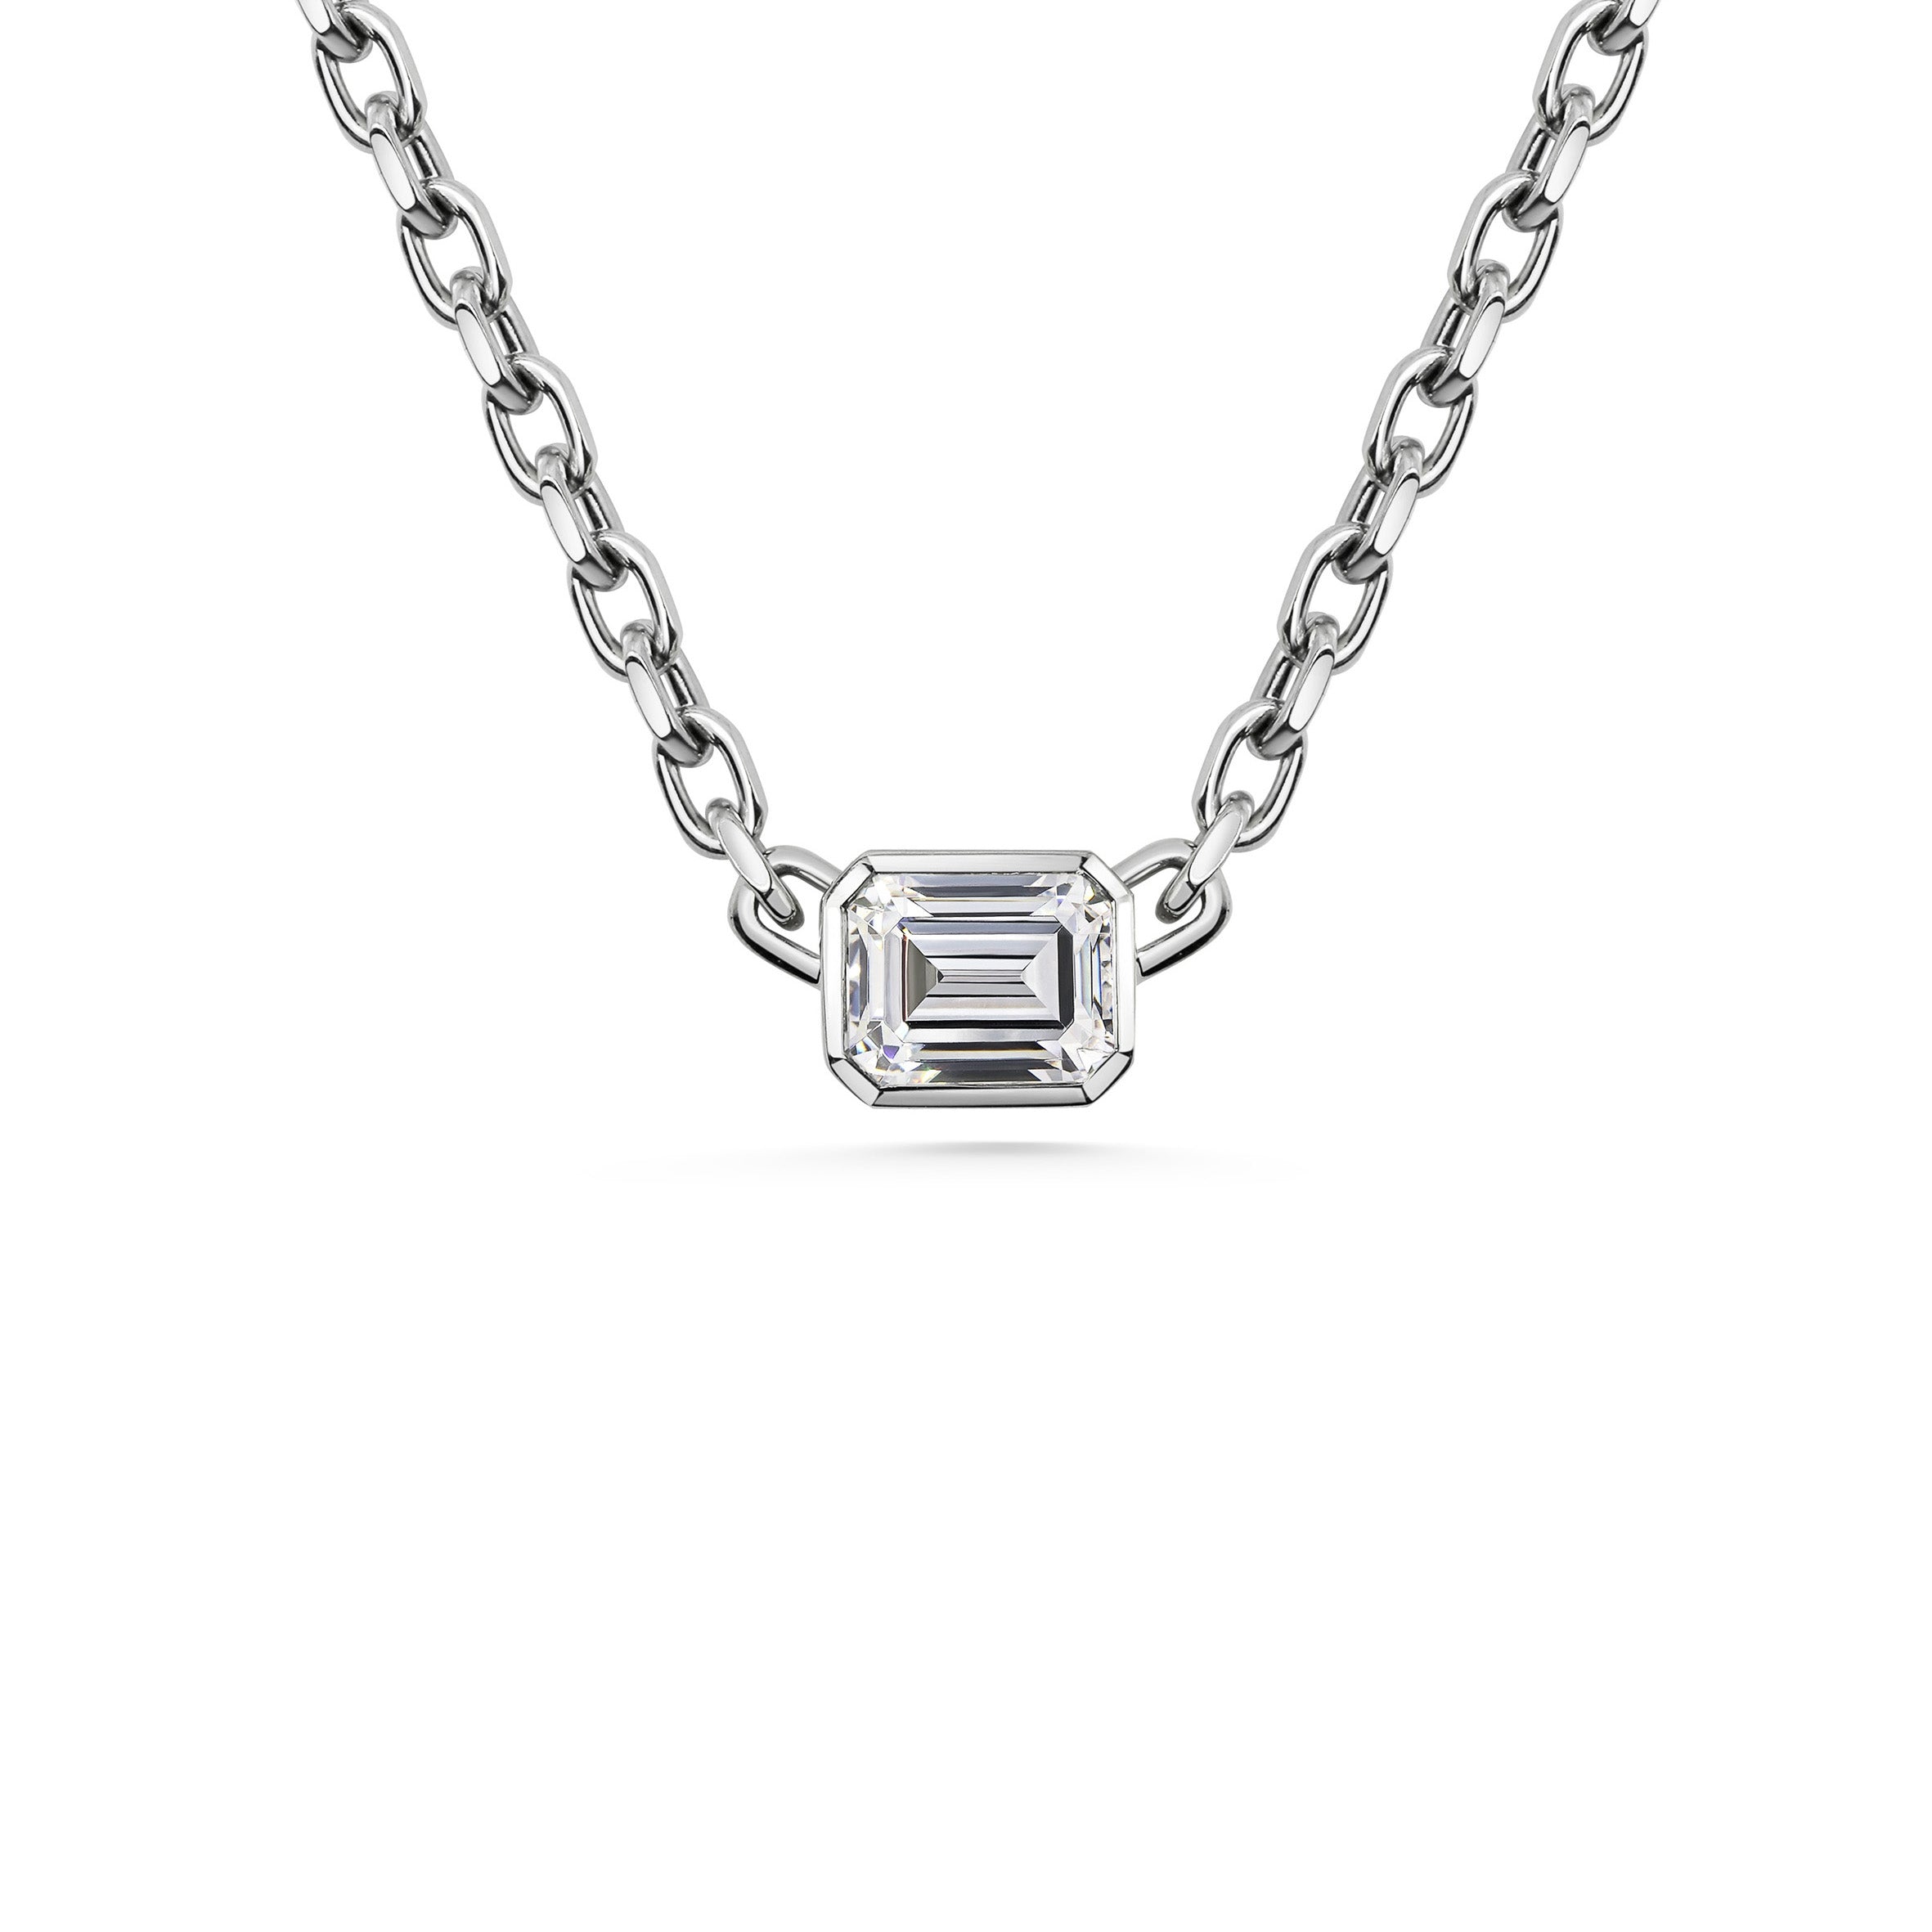 The Chunky Charm Pendant - East to West by East London jeweller Rachel Boston | Discover our collections of unique and timeless engagement rings, wedding rings, and modern fine jewellery.